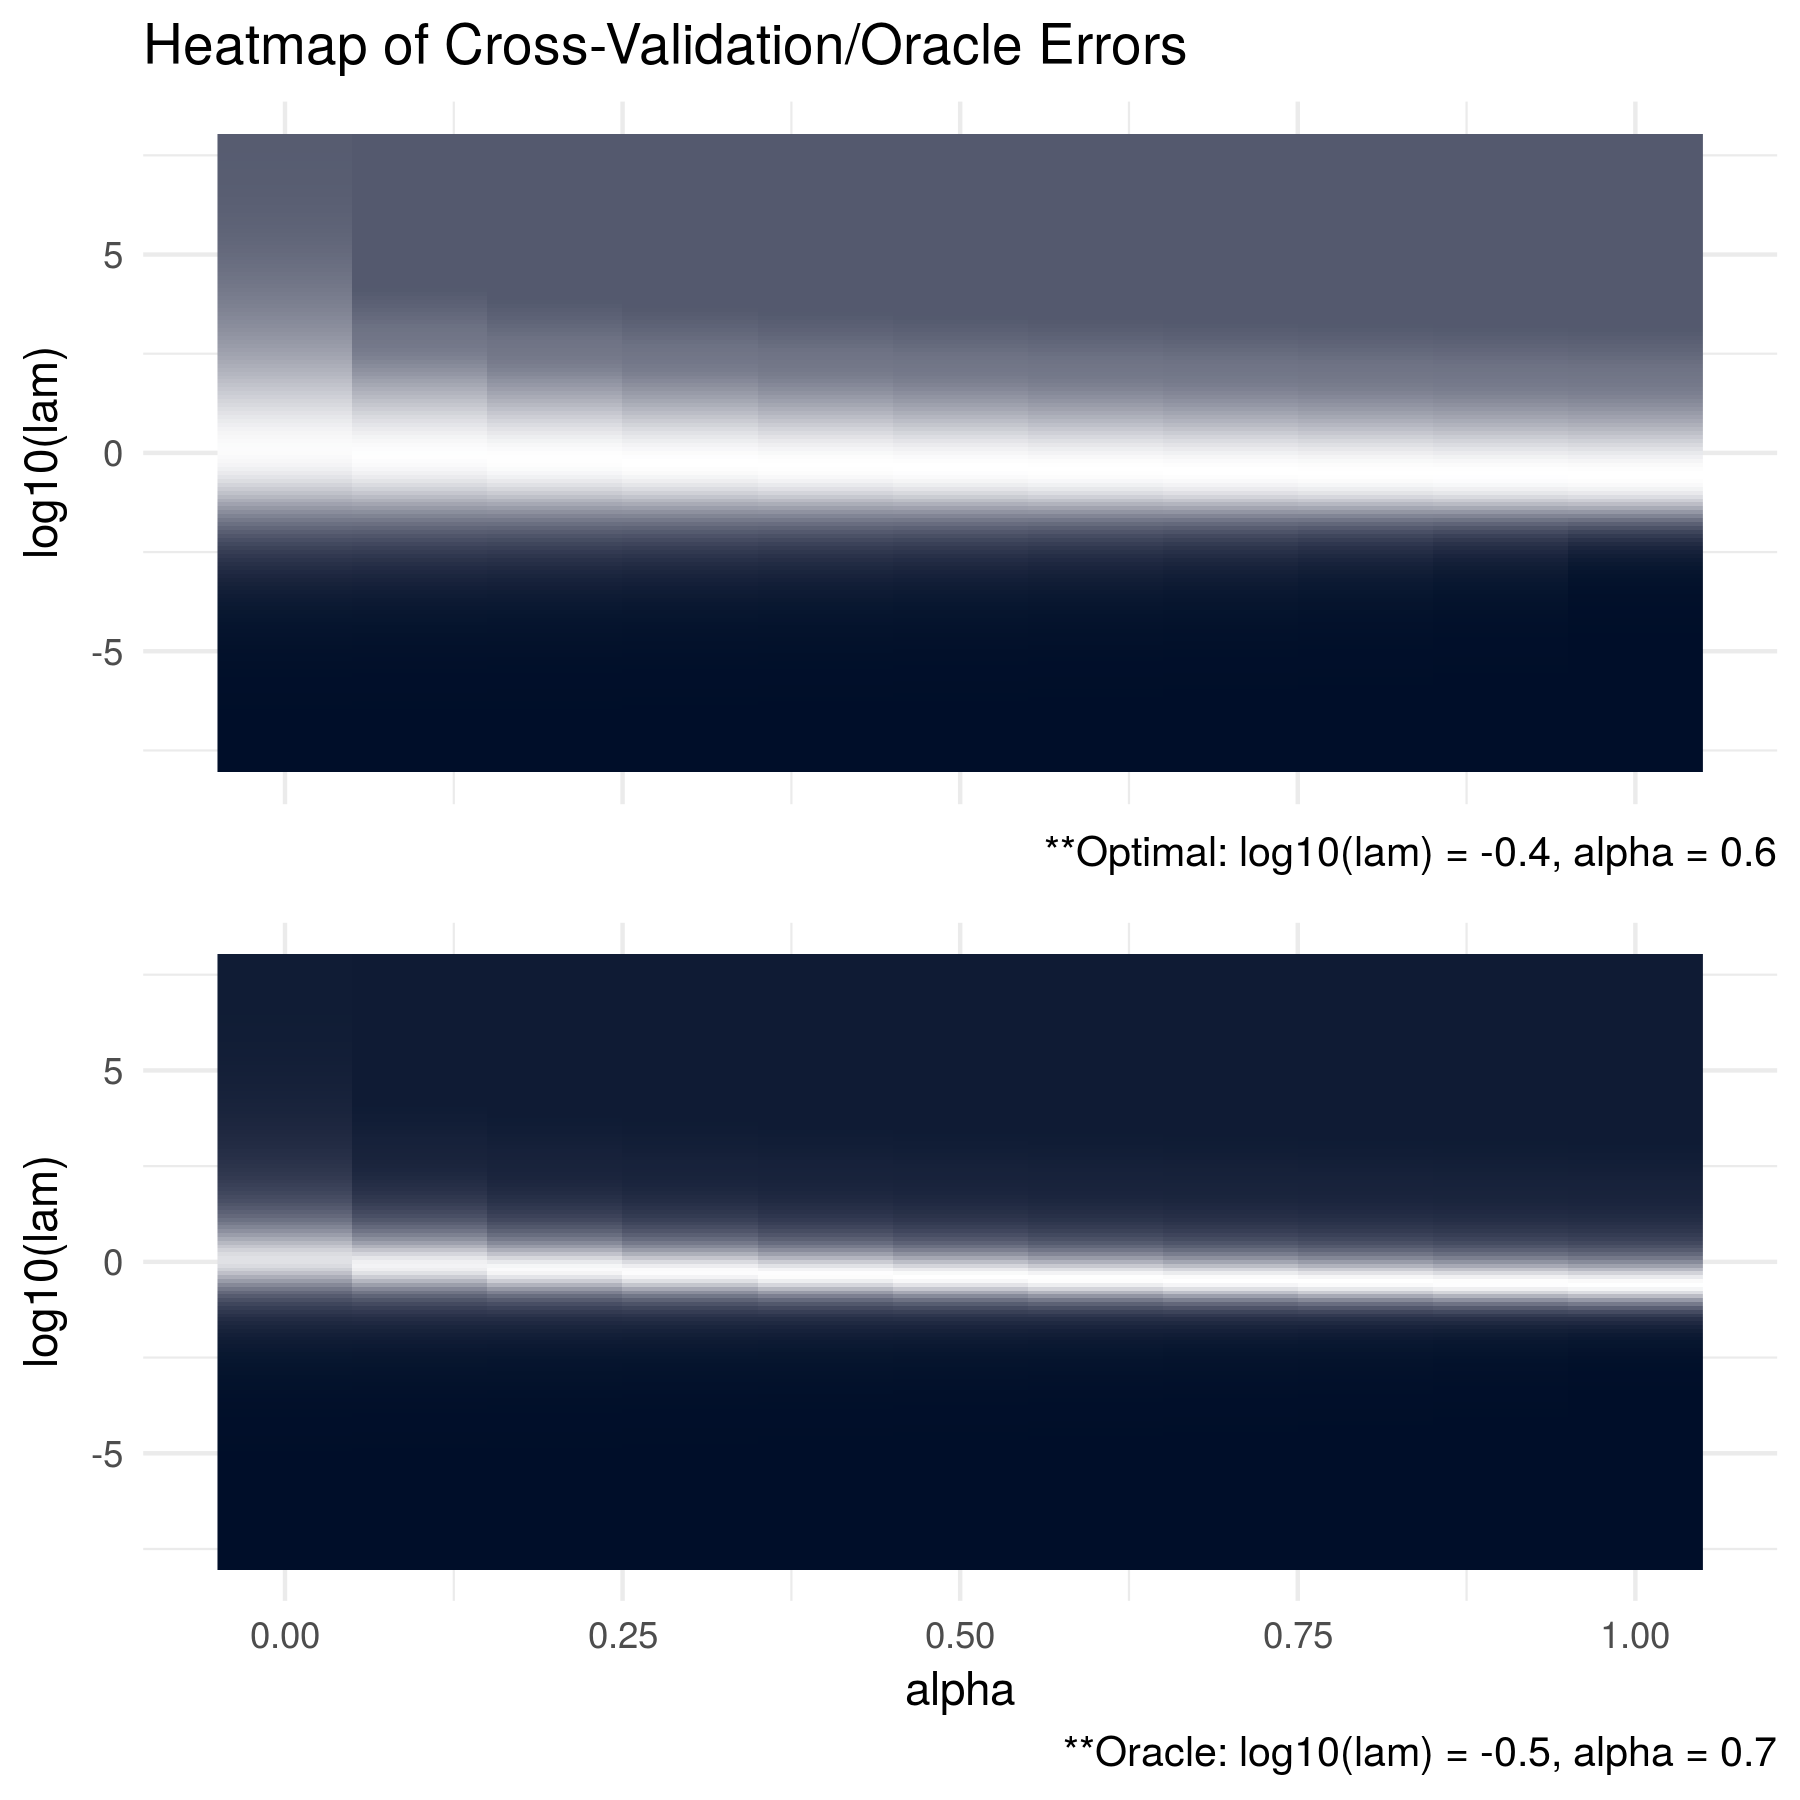 The oracle precision matrices were dense with dimension p = 100 and the data was generated with a sample size of n = 50. The cross validation errors are in the top figure and the KL losses between the estimated matrices and the oracle matrices are shown in the bottom figure. The optimal tuning parameter pair for the cross validation errors was found to be log10(lam) = -0.4 and alpha = 0.6 and log10(lam) = -0.5 and alpha = 0.7 for the KL losses. Note that brighter areas signify smaller losses.